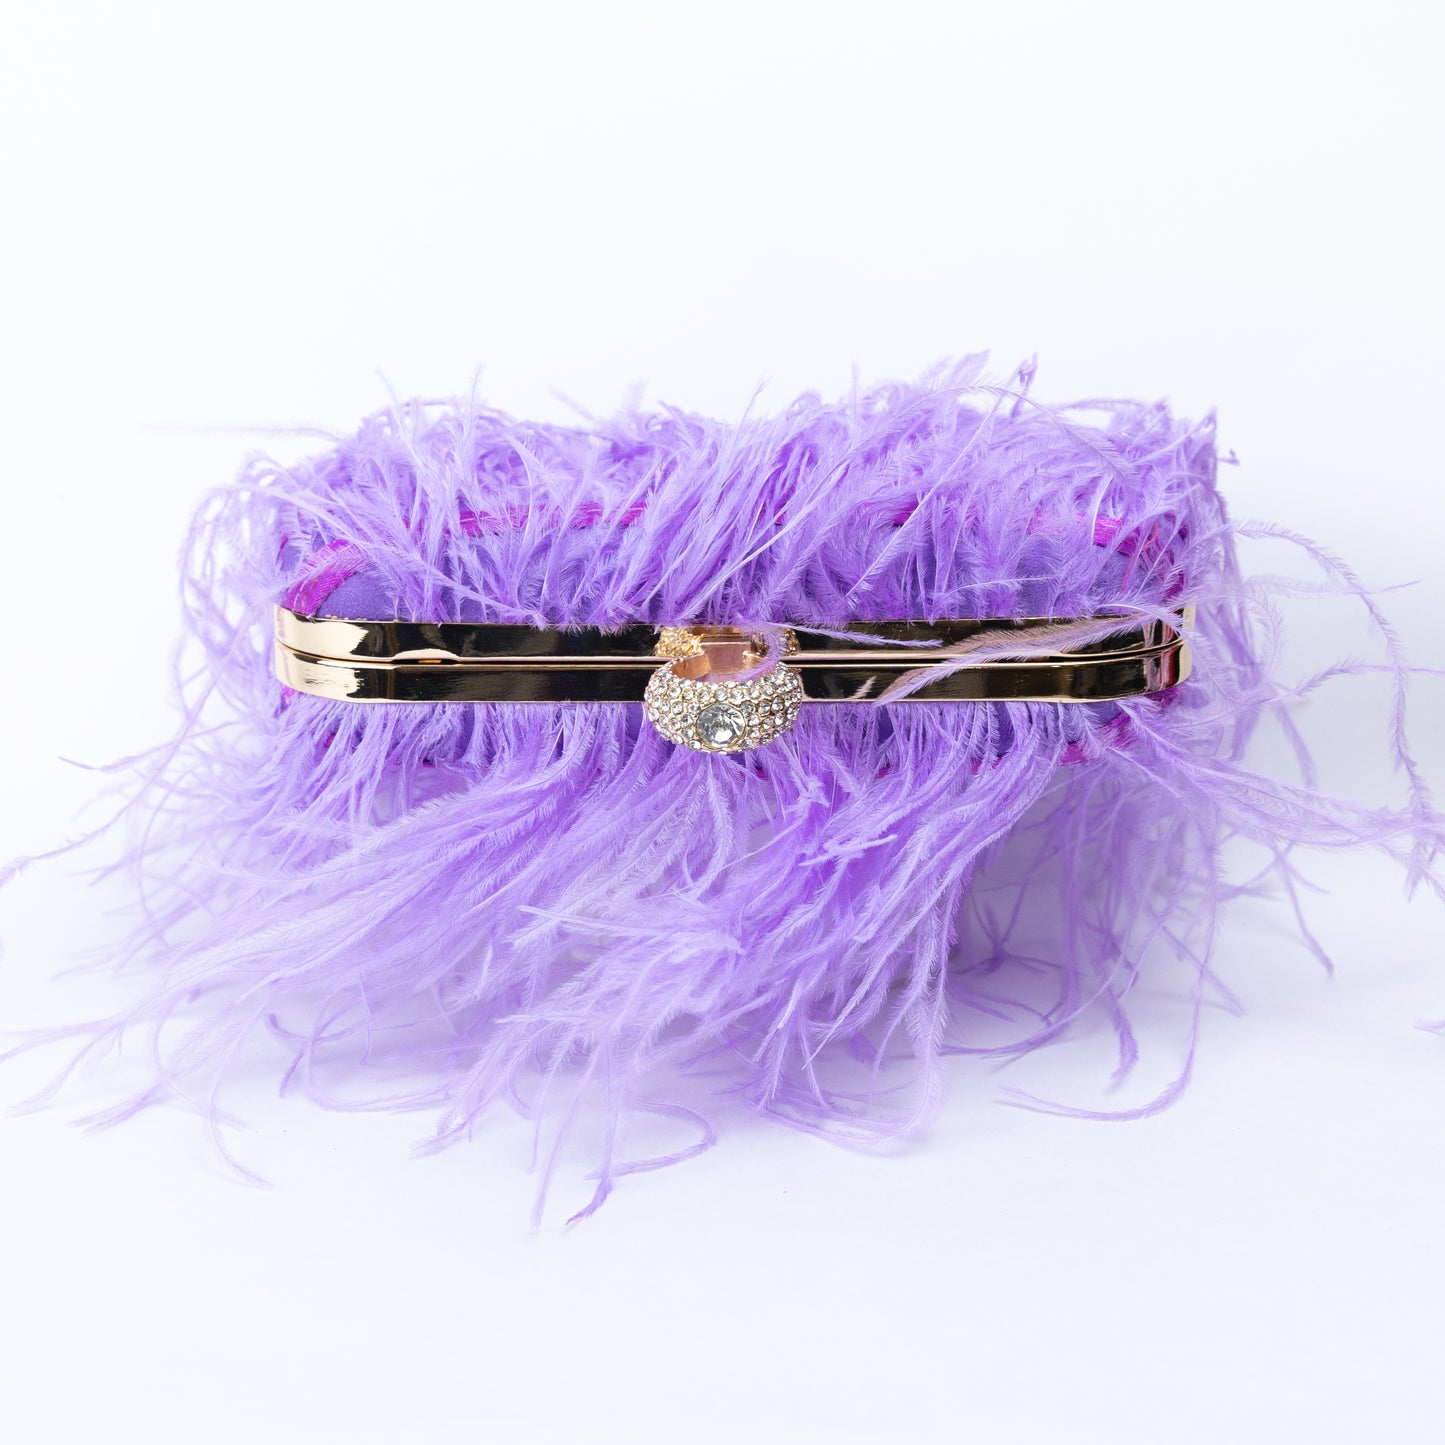 The Feather Clutch